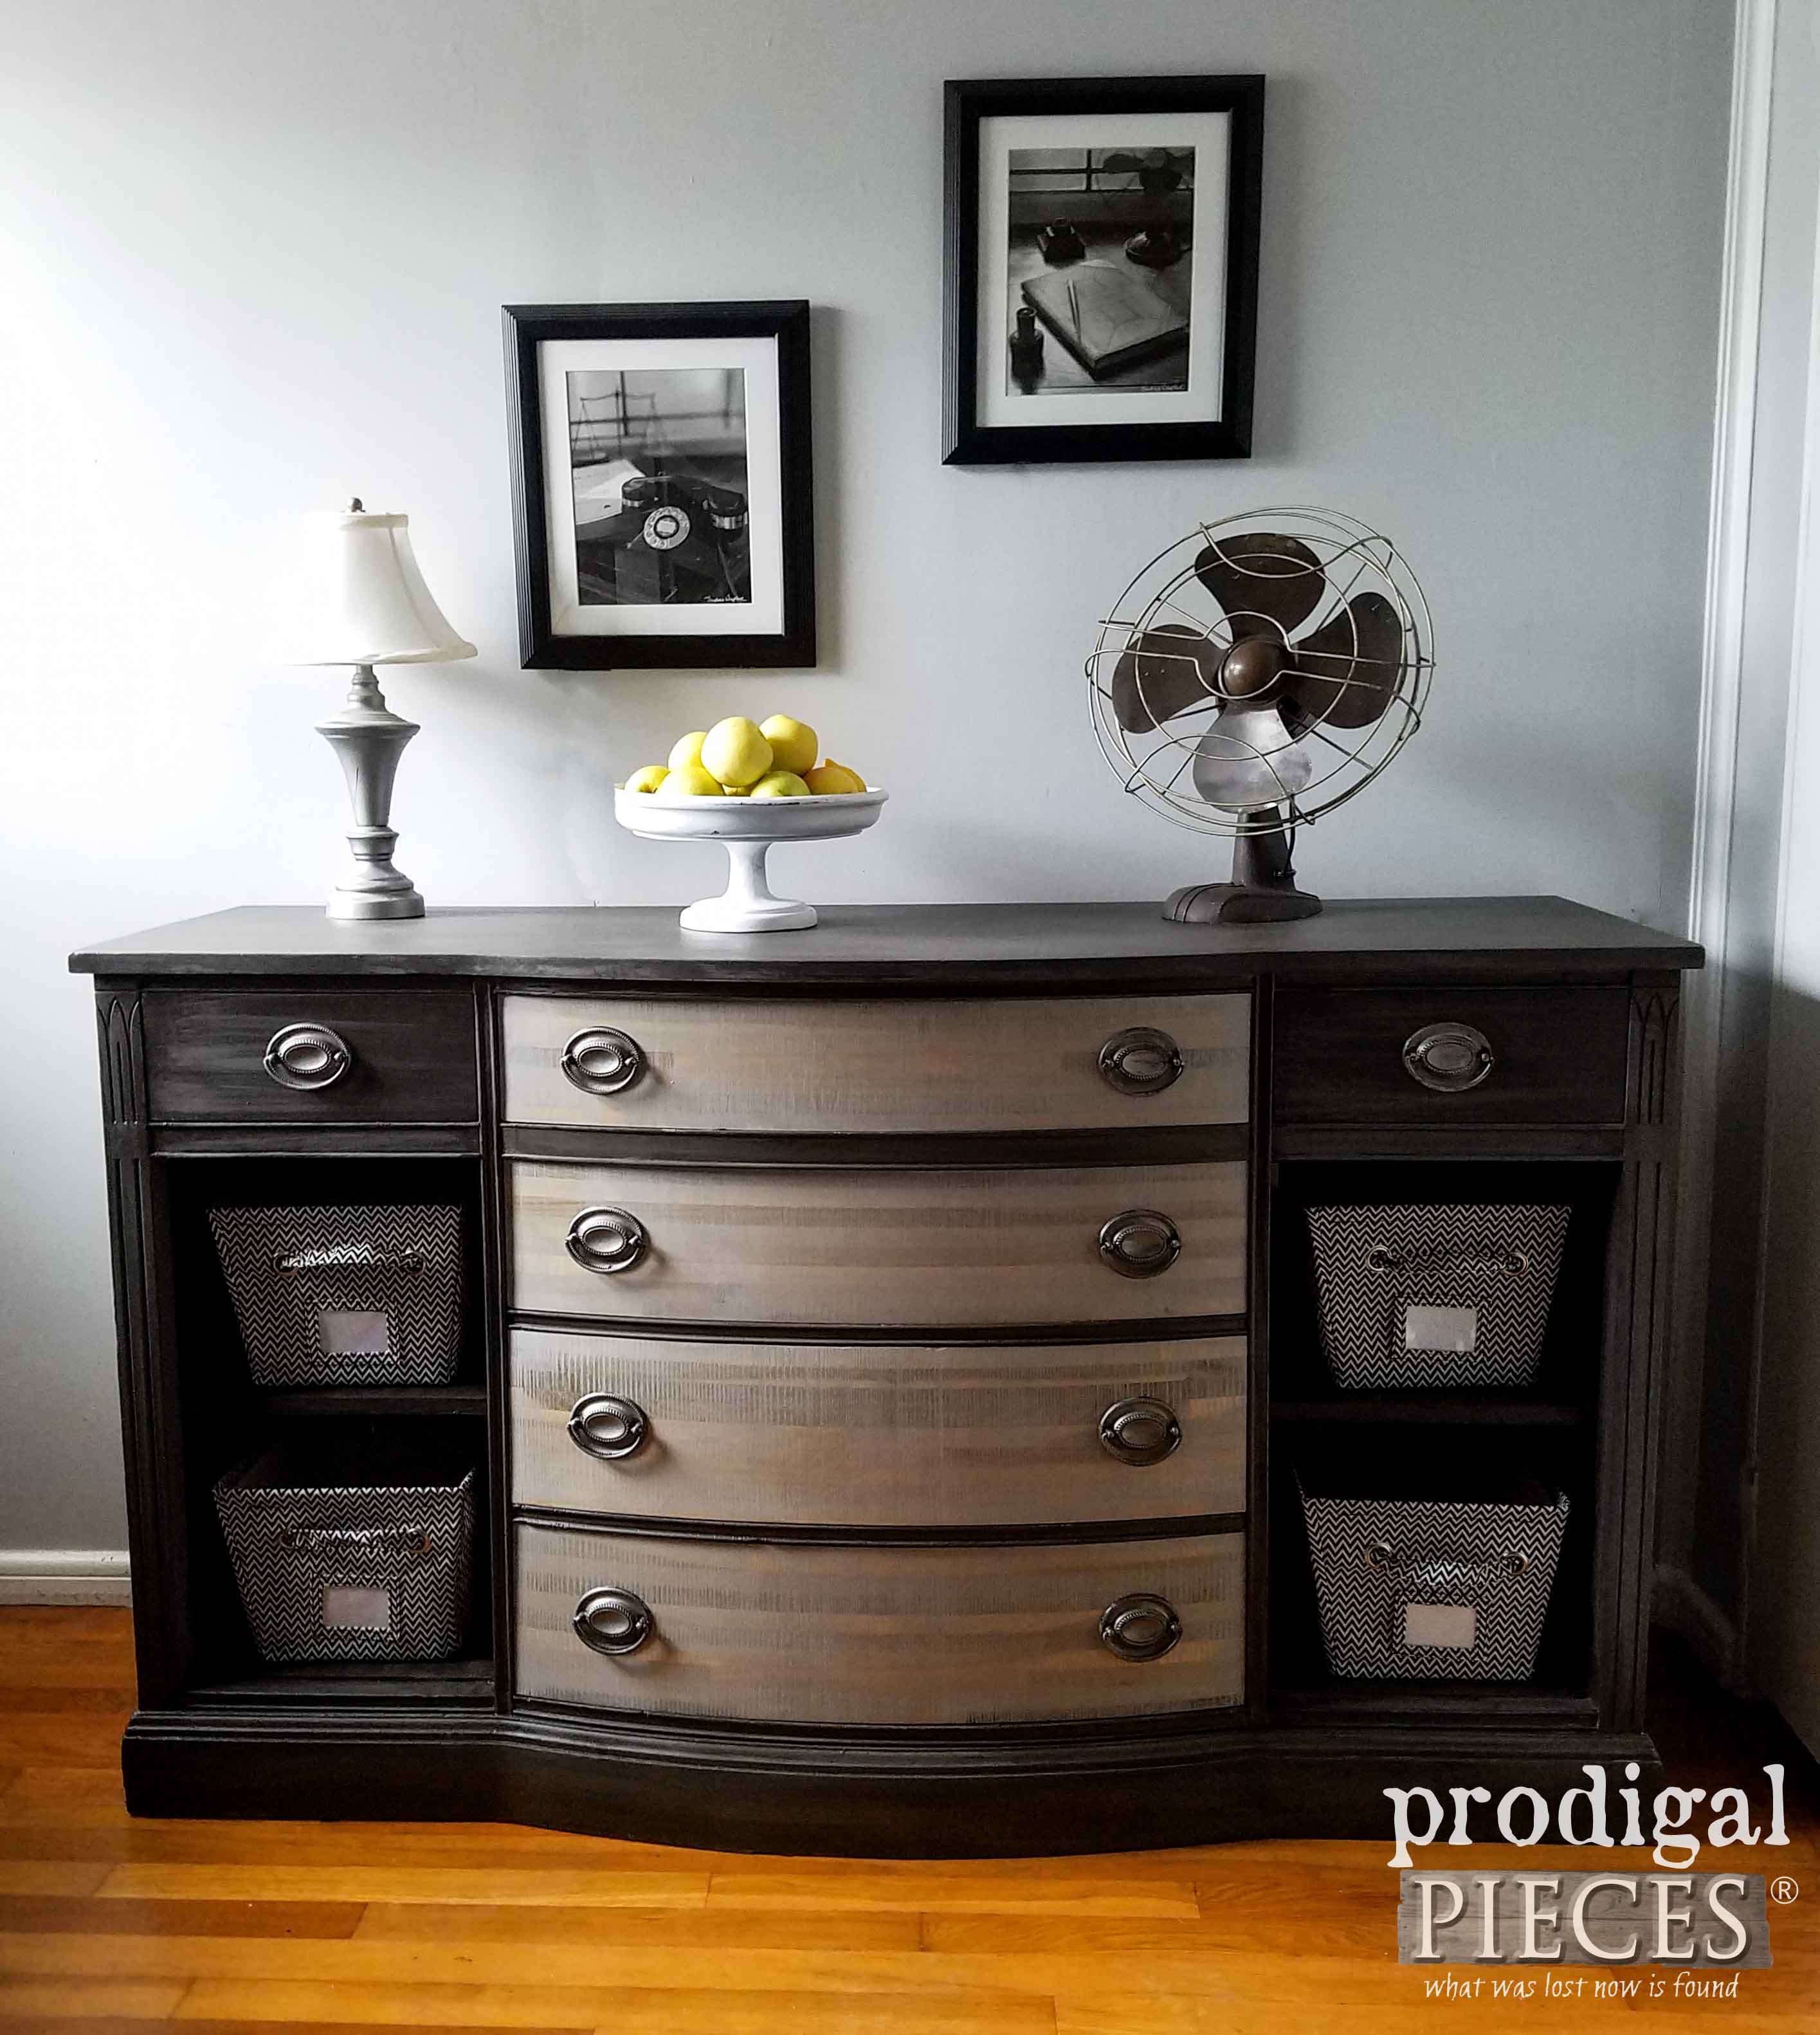 Vintage Buffet Gets Modern Chic Makeover by Teenage Boy | Prodigal Pieces | www.prodigalpieces.com